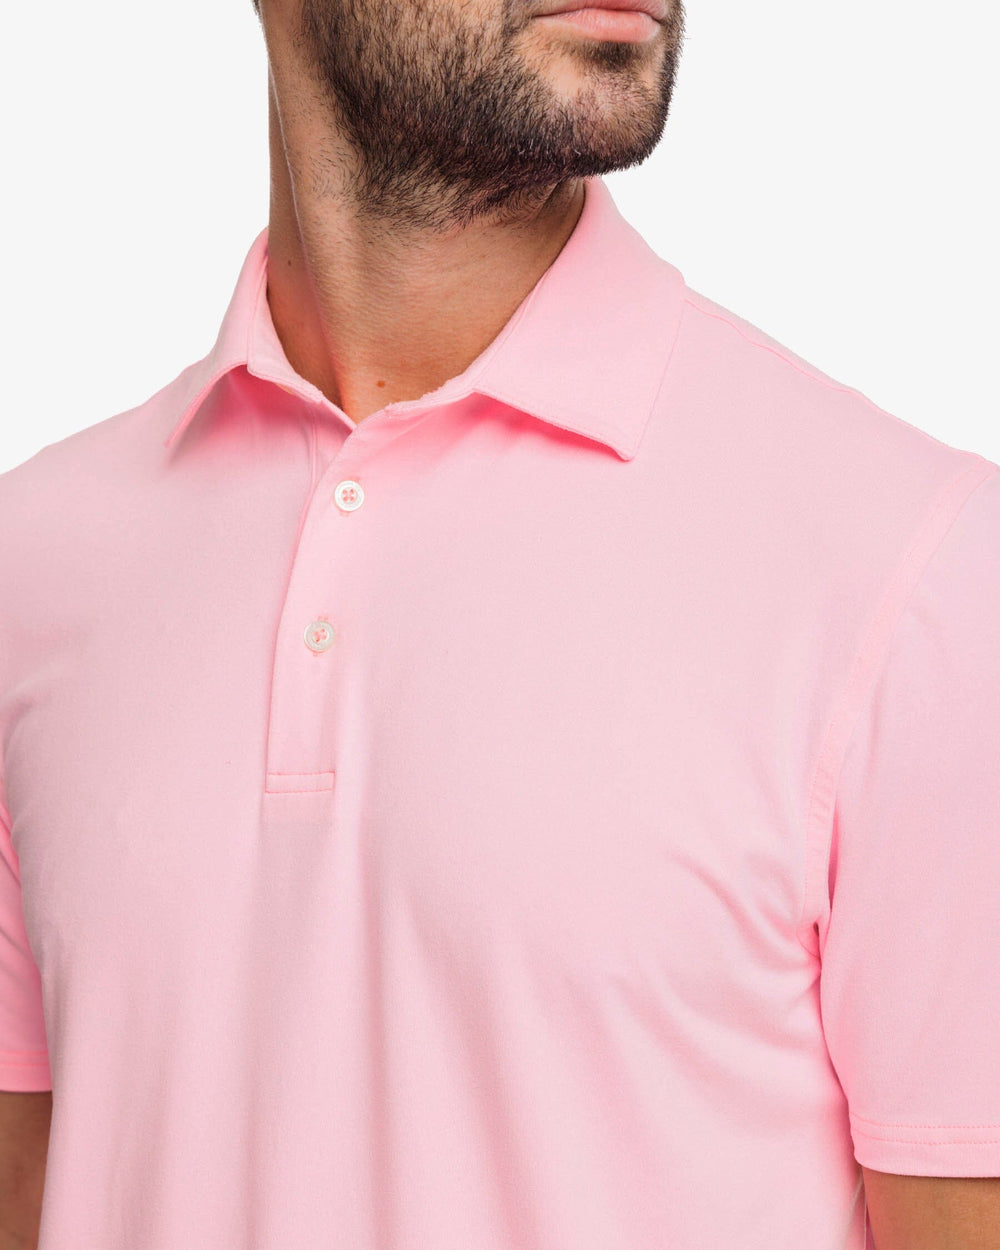 The detail view of the Southern Tide Ryder Lilly Polo Shirt by Southern Tide - Mandevilla Baby